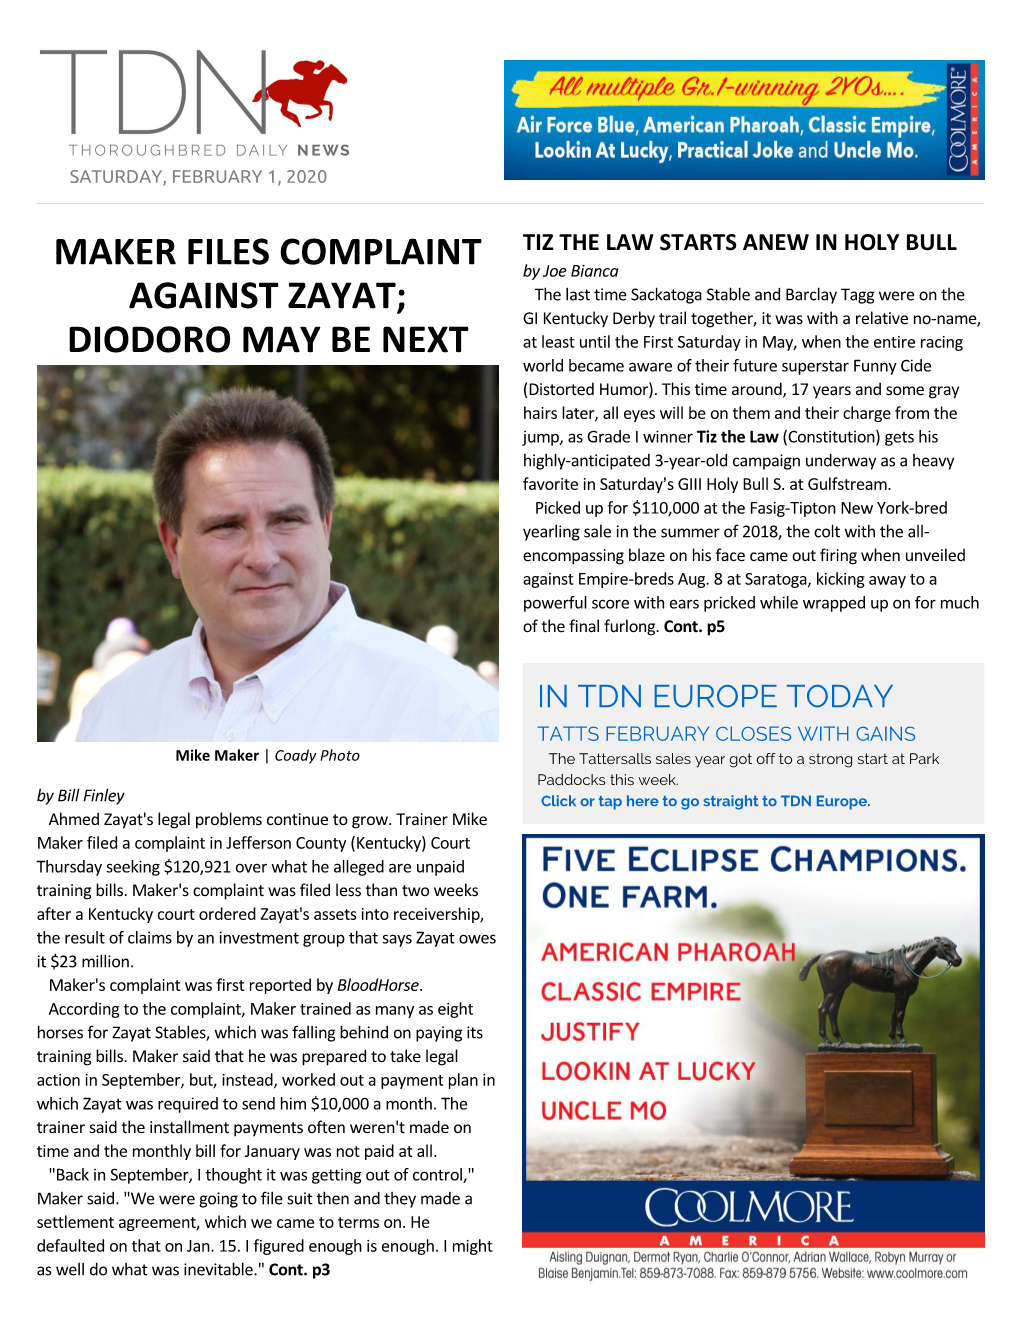 Maker Files Complaint Against Zayat; Diodoro May Be Next